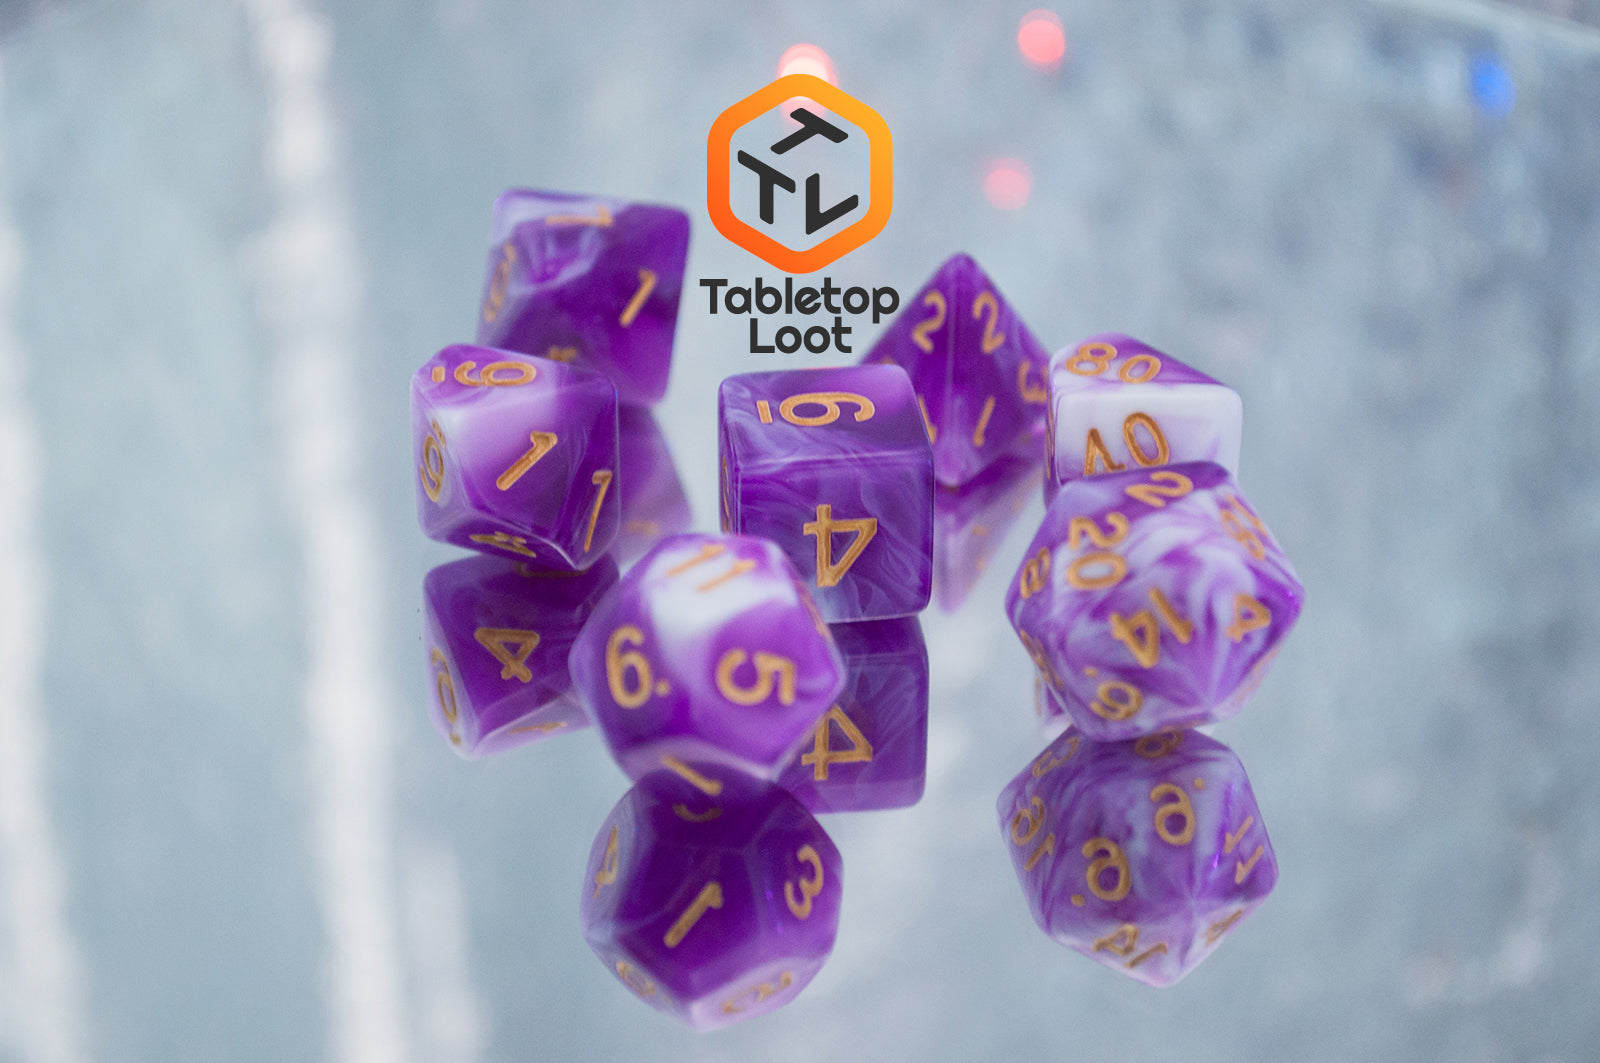 The Berry Blast 7 piece dice set from Tabletop Loot with swirls of purple and white and gold numbering.